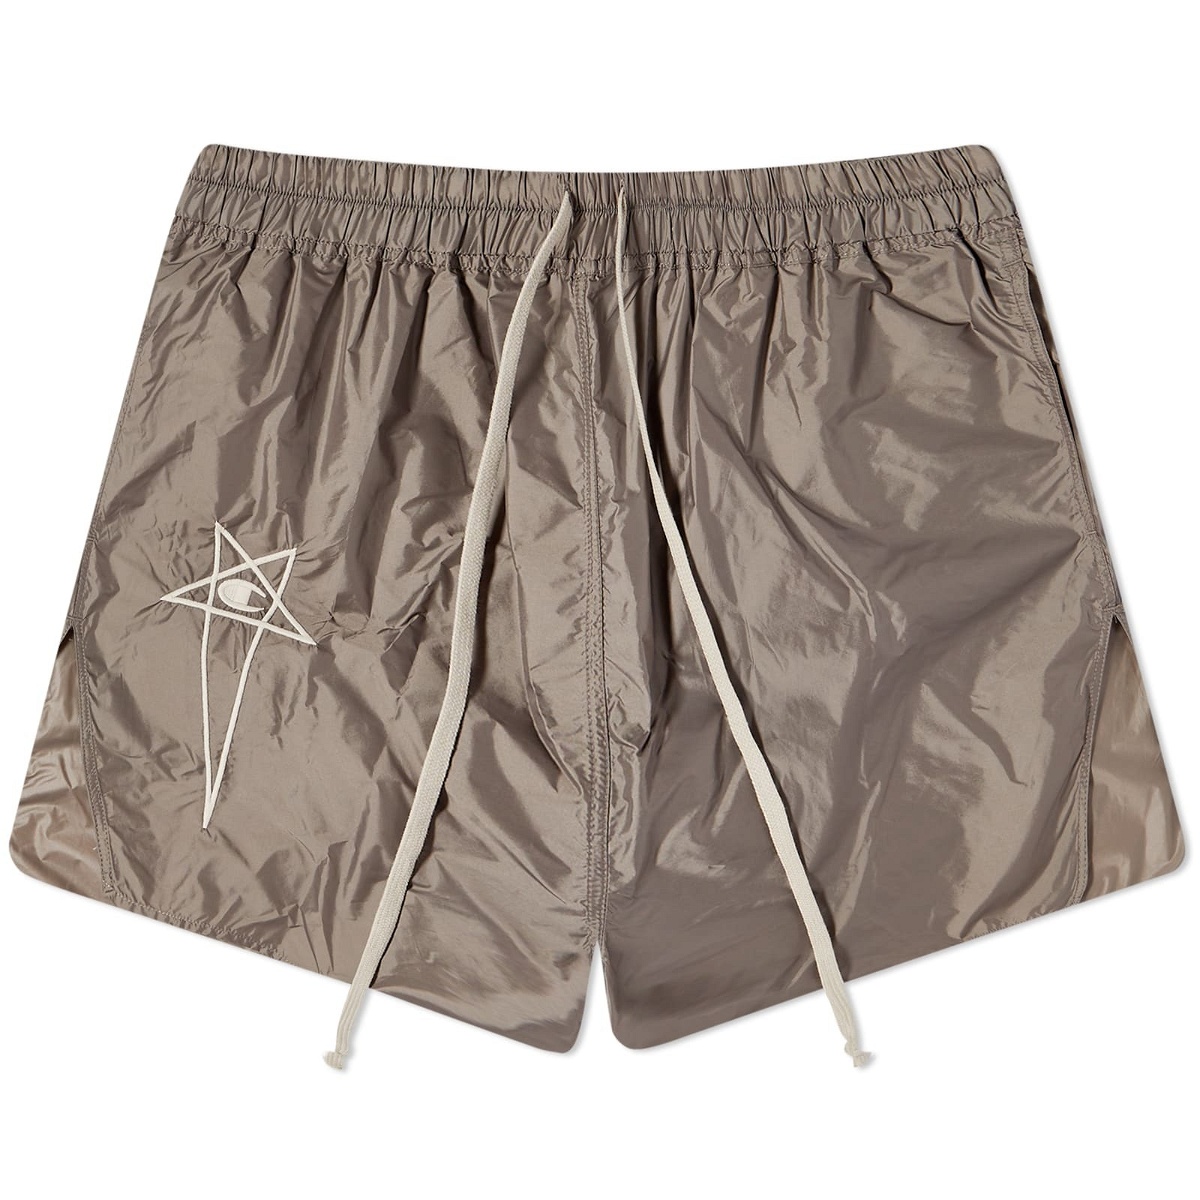 Rick Owens Women's x Champion Dolphin Boxers in Dust Rick Owens